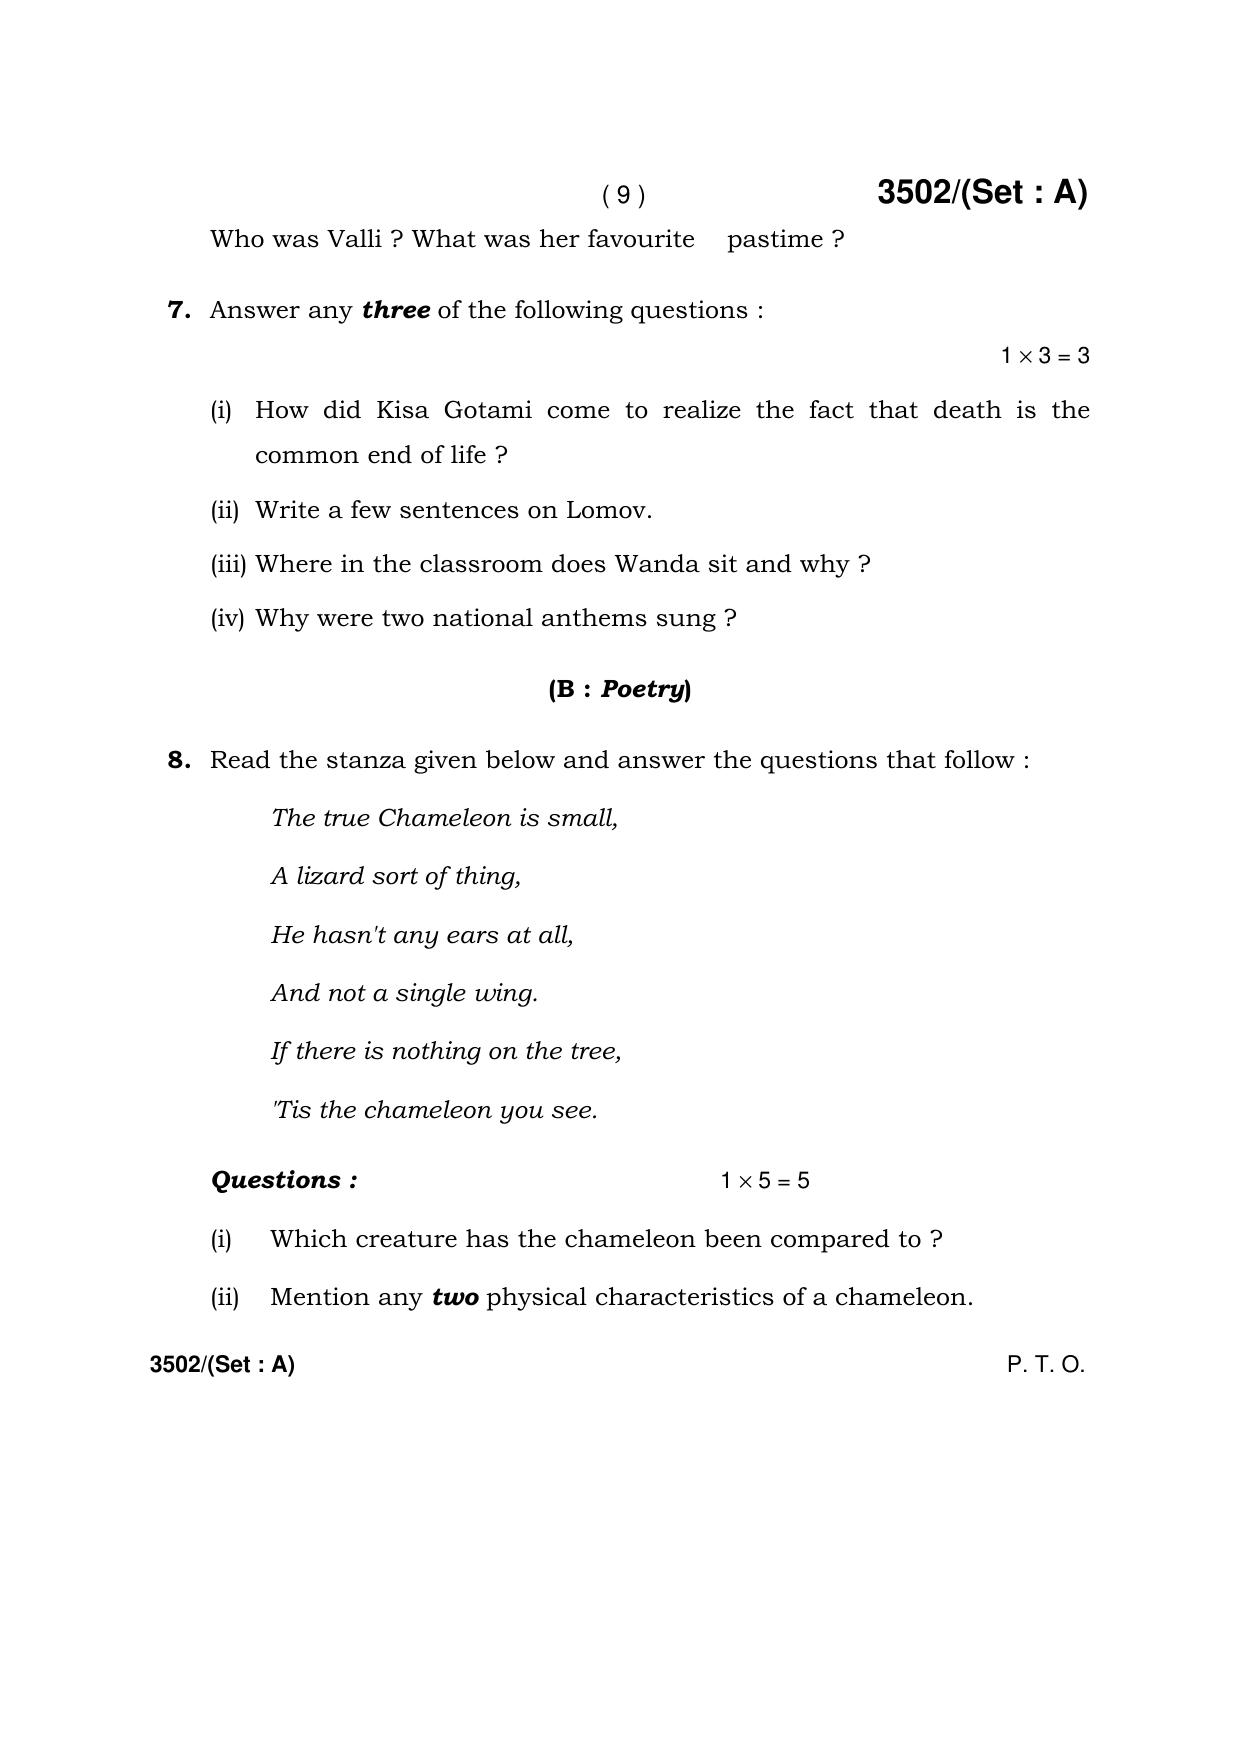 Haryana Board HBSE Class 10 English -A 2018 Question Paper - Page 9